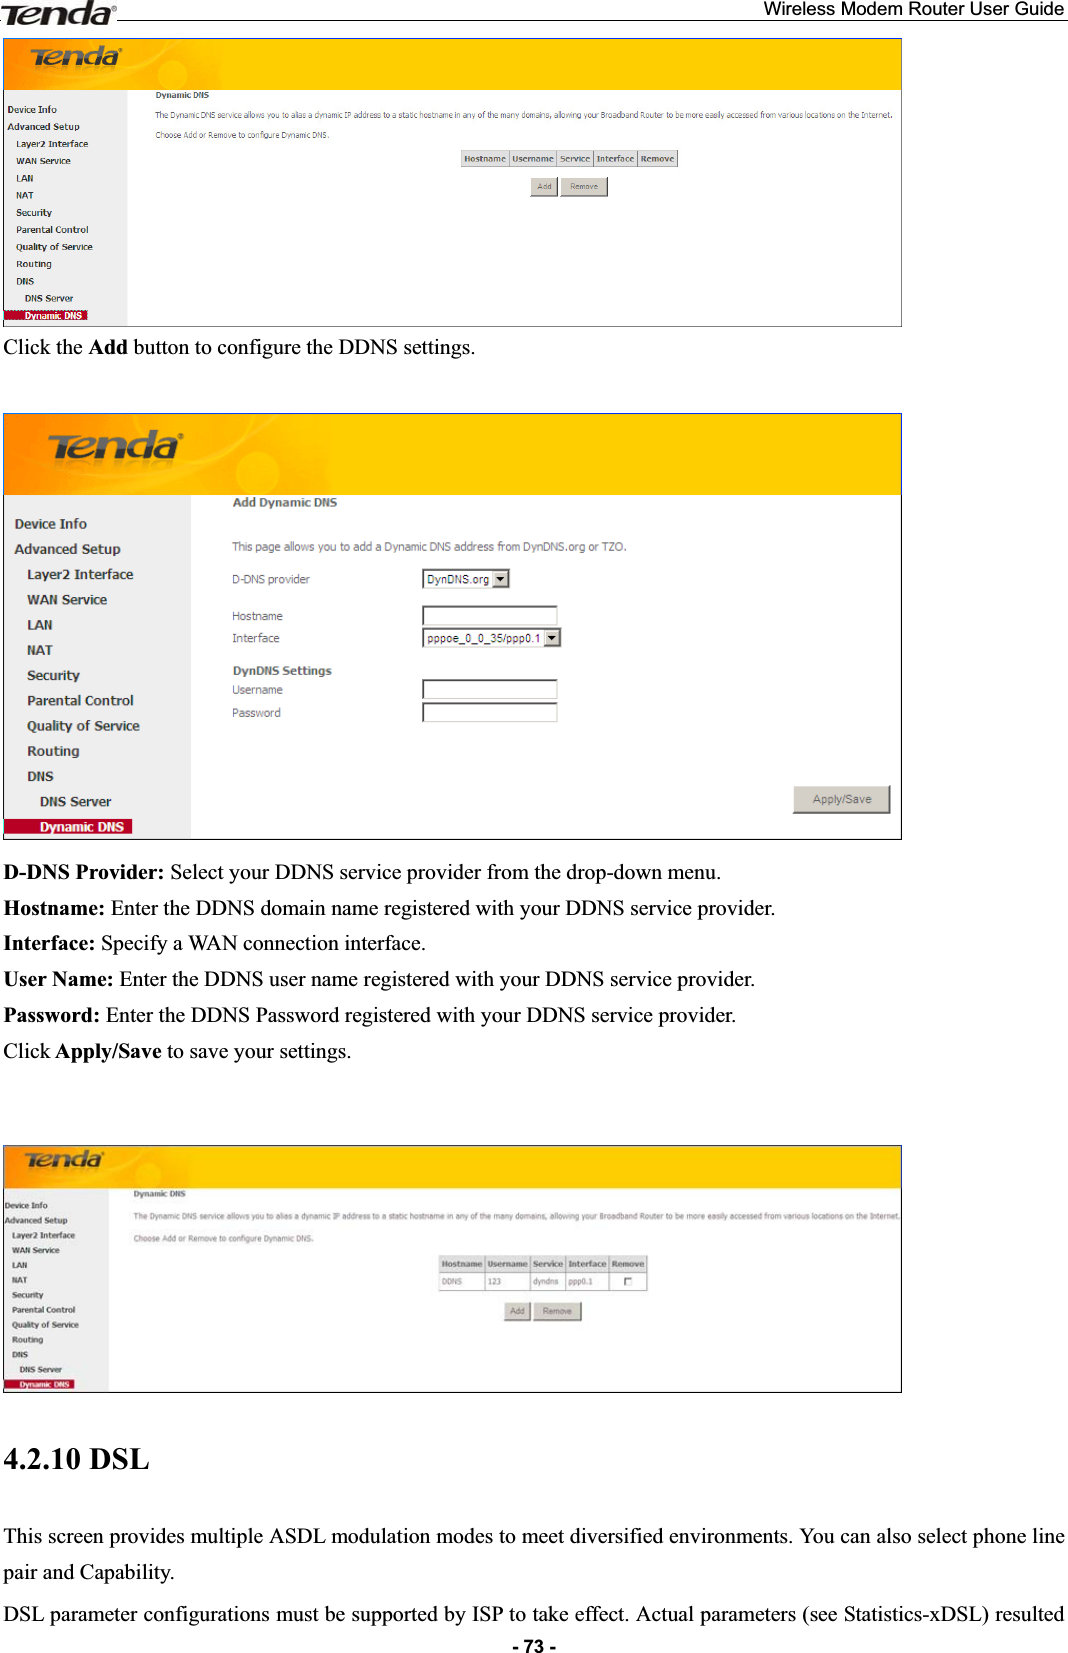 Wireless Modem Router User Guide- 73 -Click the Add button to configure the DDNS settings. D-DNS Provider: Select your DDNS service provider from the drop-down menu. Hostname: Enter the DDNS domain name registered with your DDNS service provider. Interface: Specify a WAN connection interface. User Name: Enter the DDNS user name registered with your DDNS service provider. Password: Enter the DDNS Password registered with your DDNS service provider. Click Apply/Save to save your settings. 4.2.10 DSL This screen provides multiple ASDL modulation modes to meet diversified environments. You can also select phone line pair and Capability. DSL parameter configurations must be supported by ISP to take effect. Actual parameters (see Statistics-xDSL) resulted 